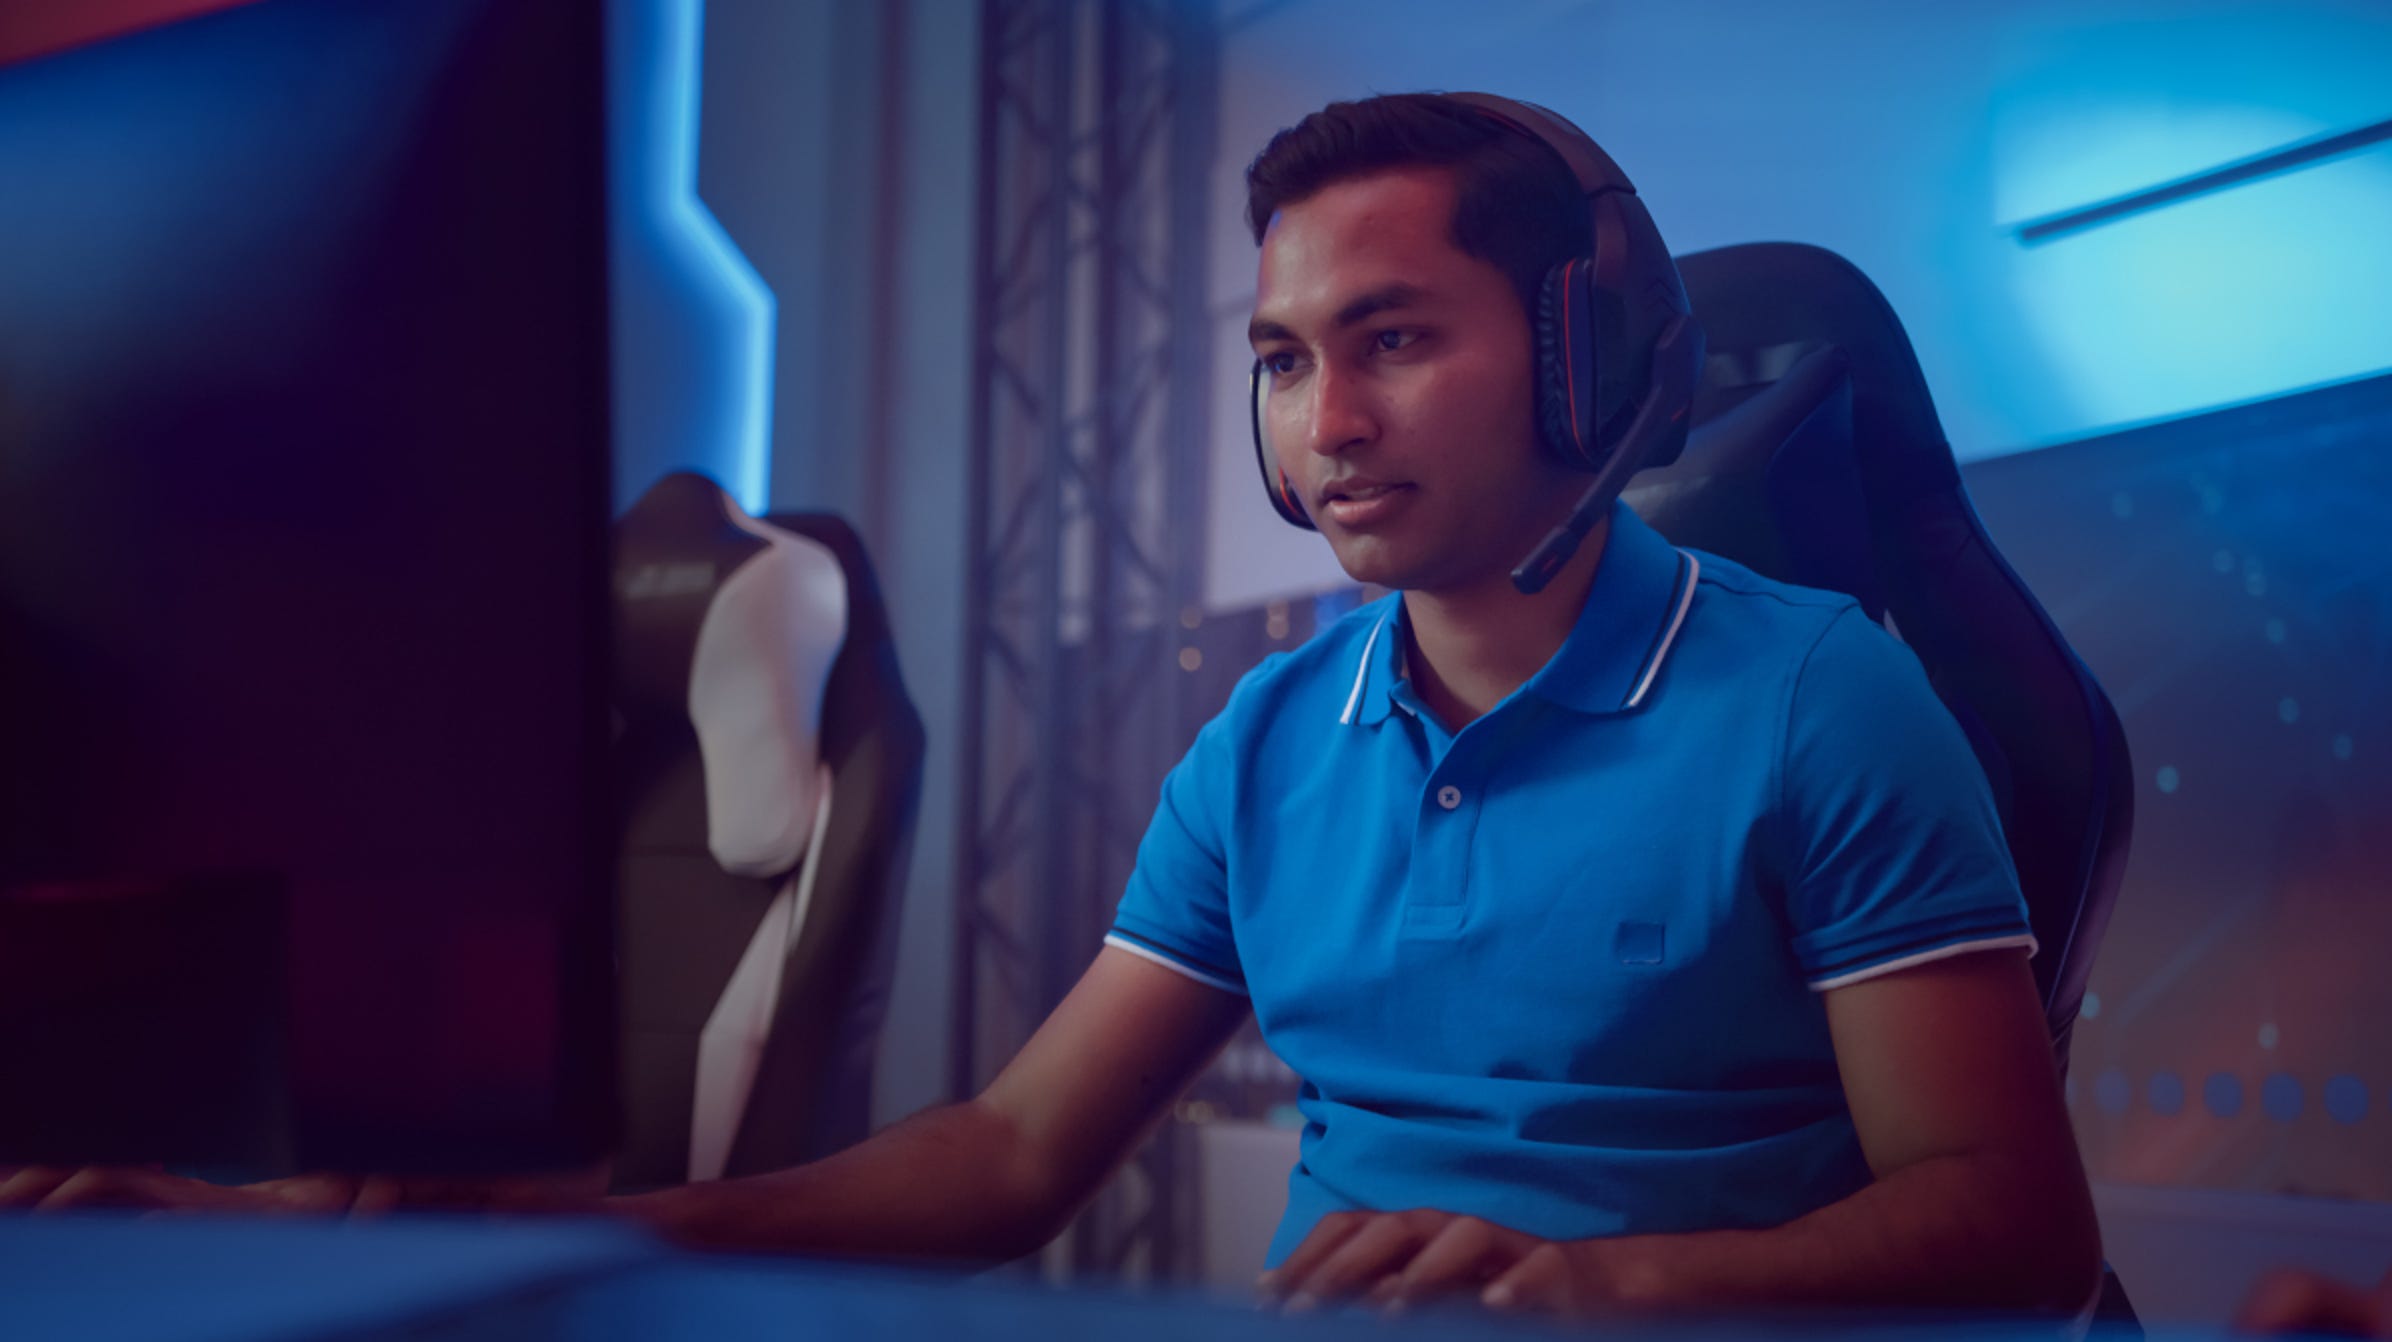 Gaming Headsets vs. Regular Headsets: What’s the Difference?